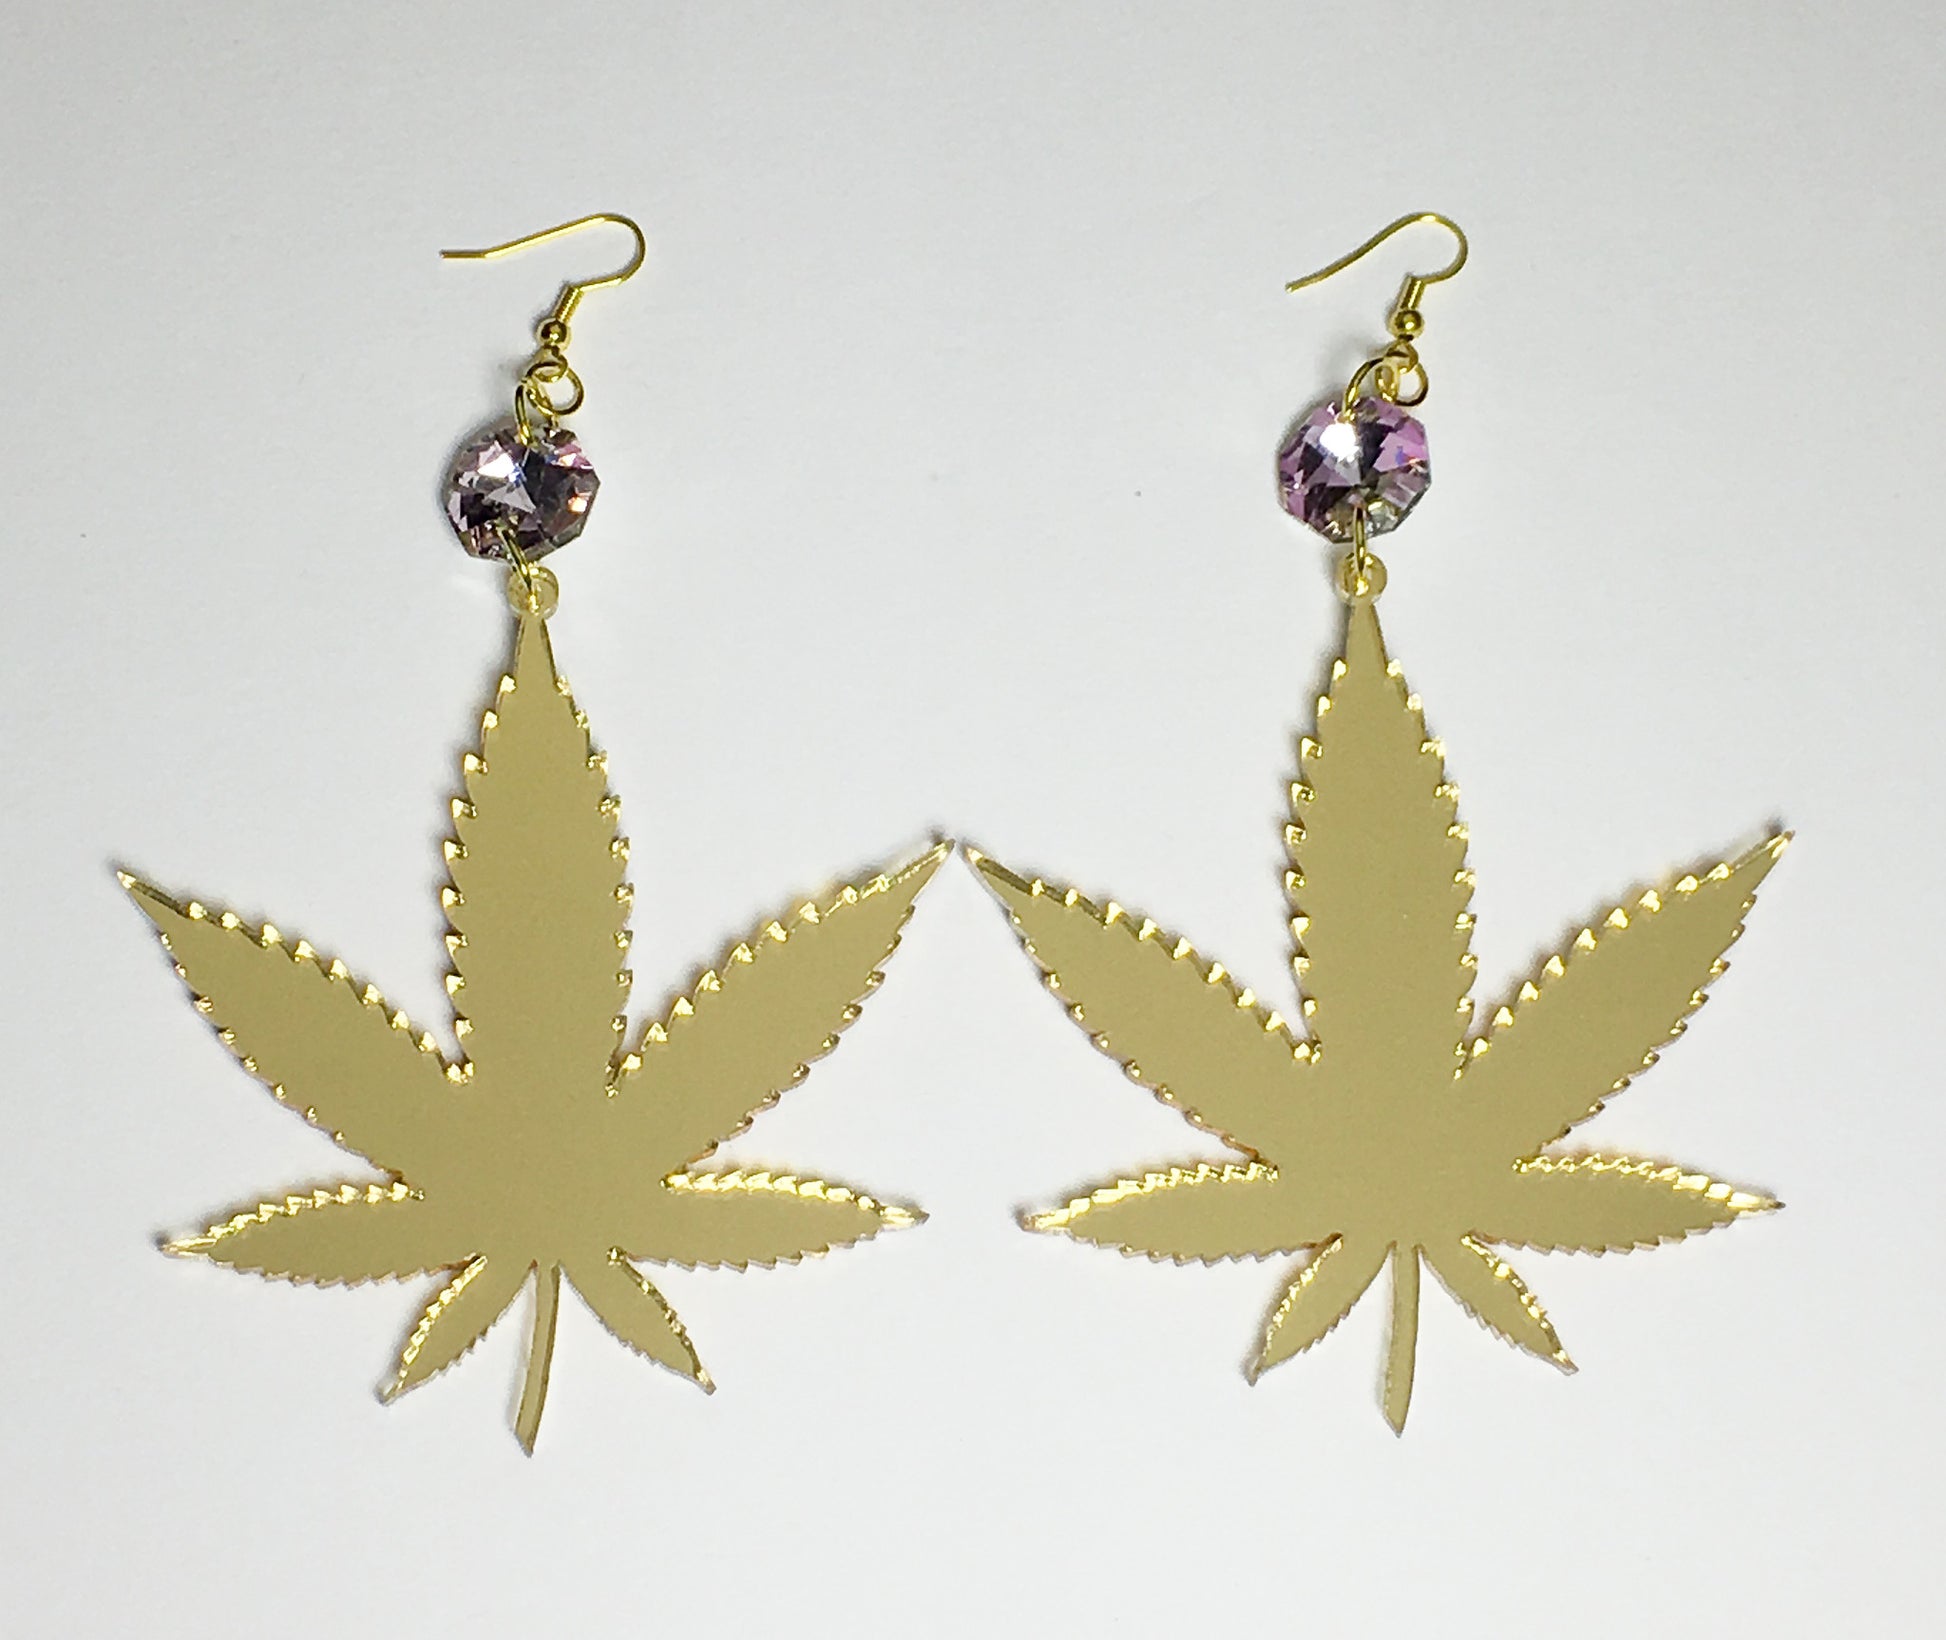 TRIXY STARR - Irie Weed earrings, Gold - The Giant Peach